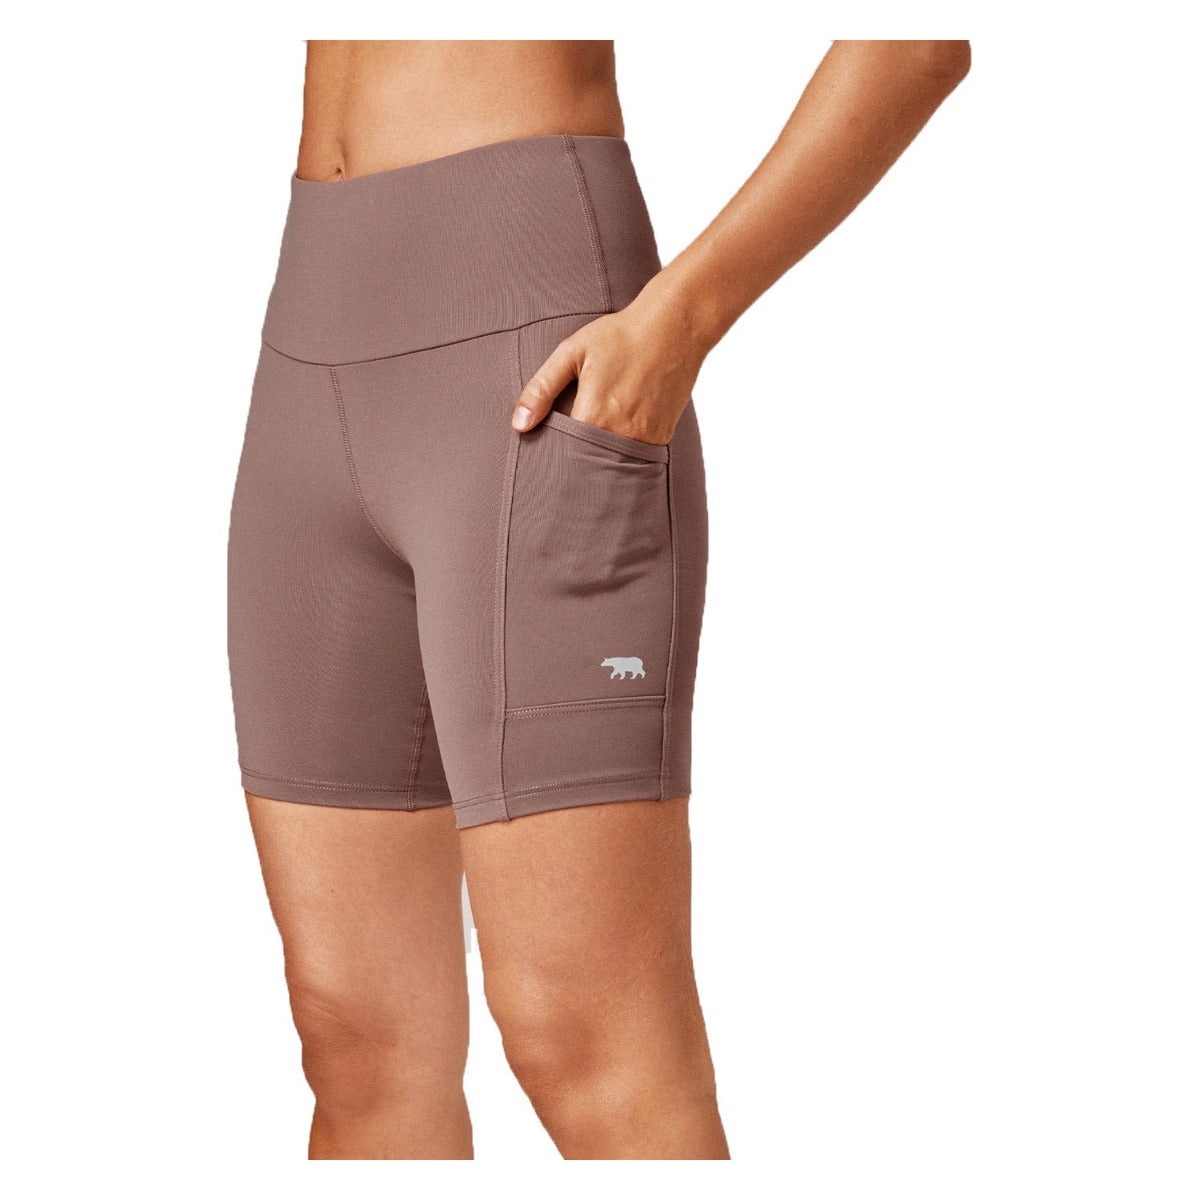 Running Bare Ab Waisted Power Moves Bike Short Tights 7" - Brown